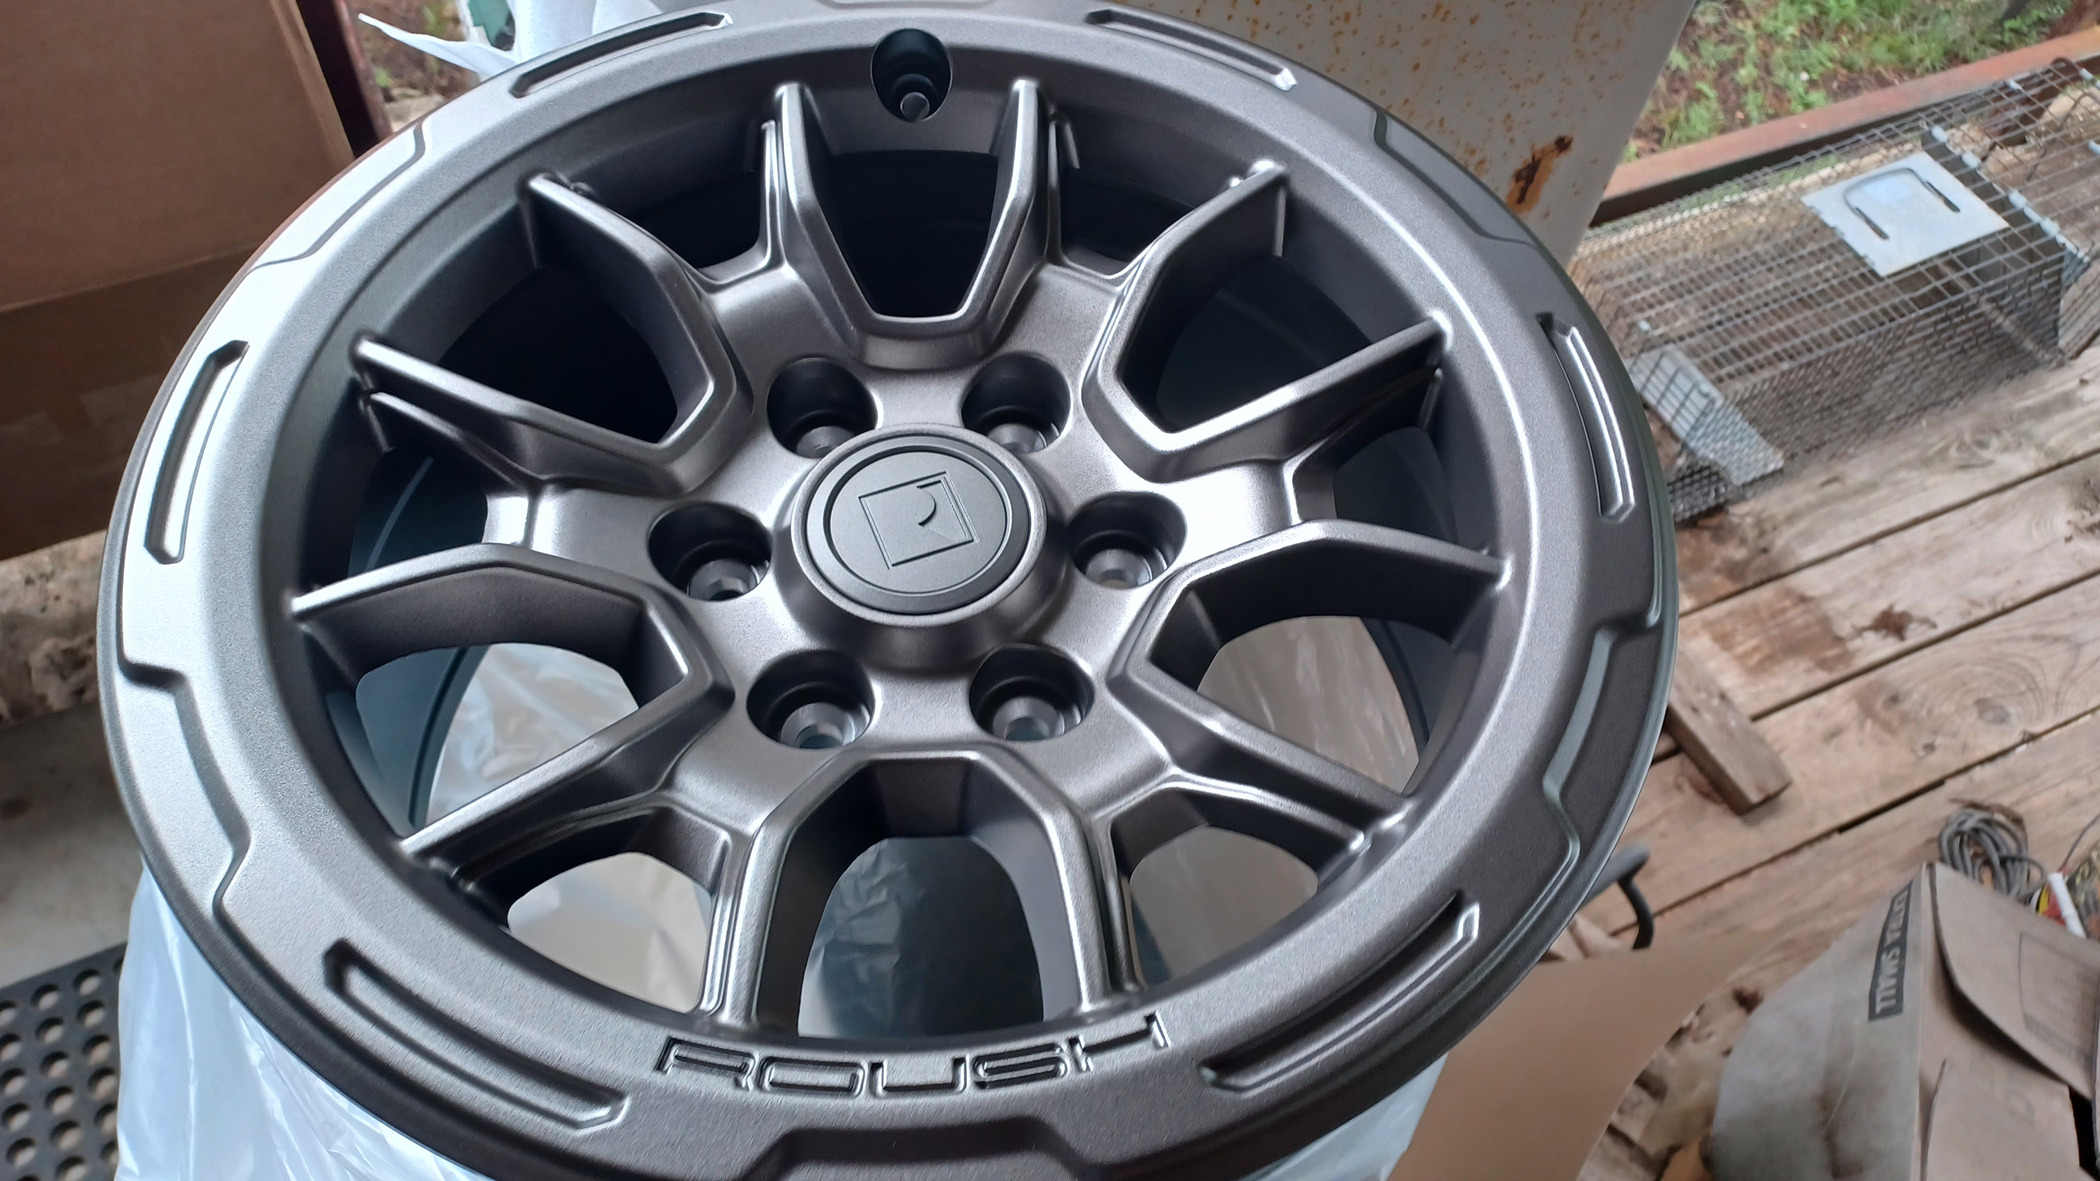 Ford Bronco Polished Aluminum Wheels - Who has Installed These? - Pics? 20240502_110430